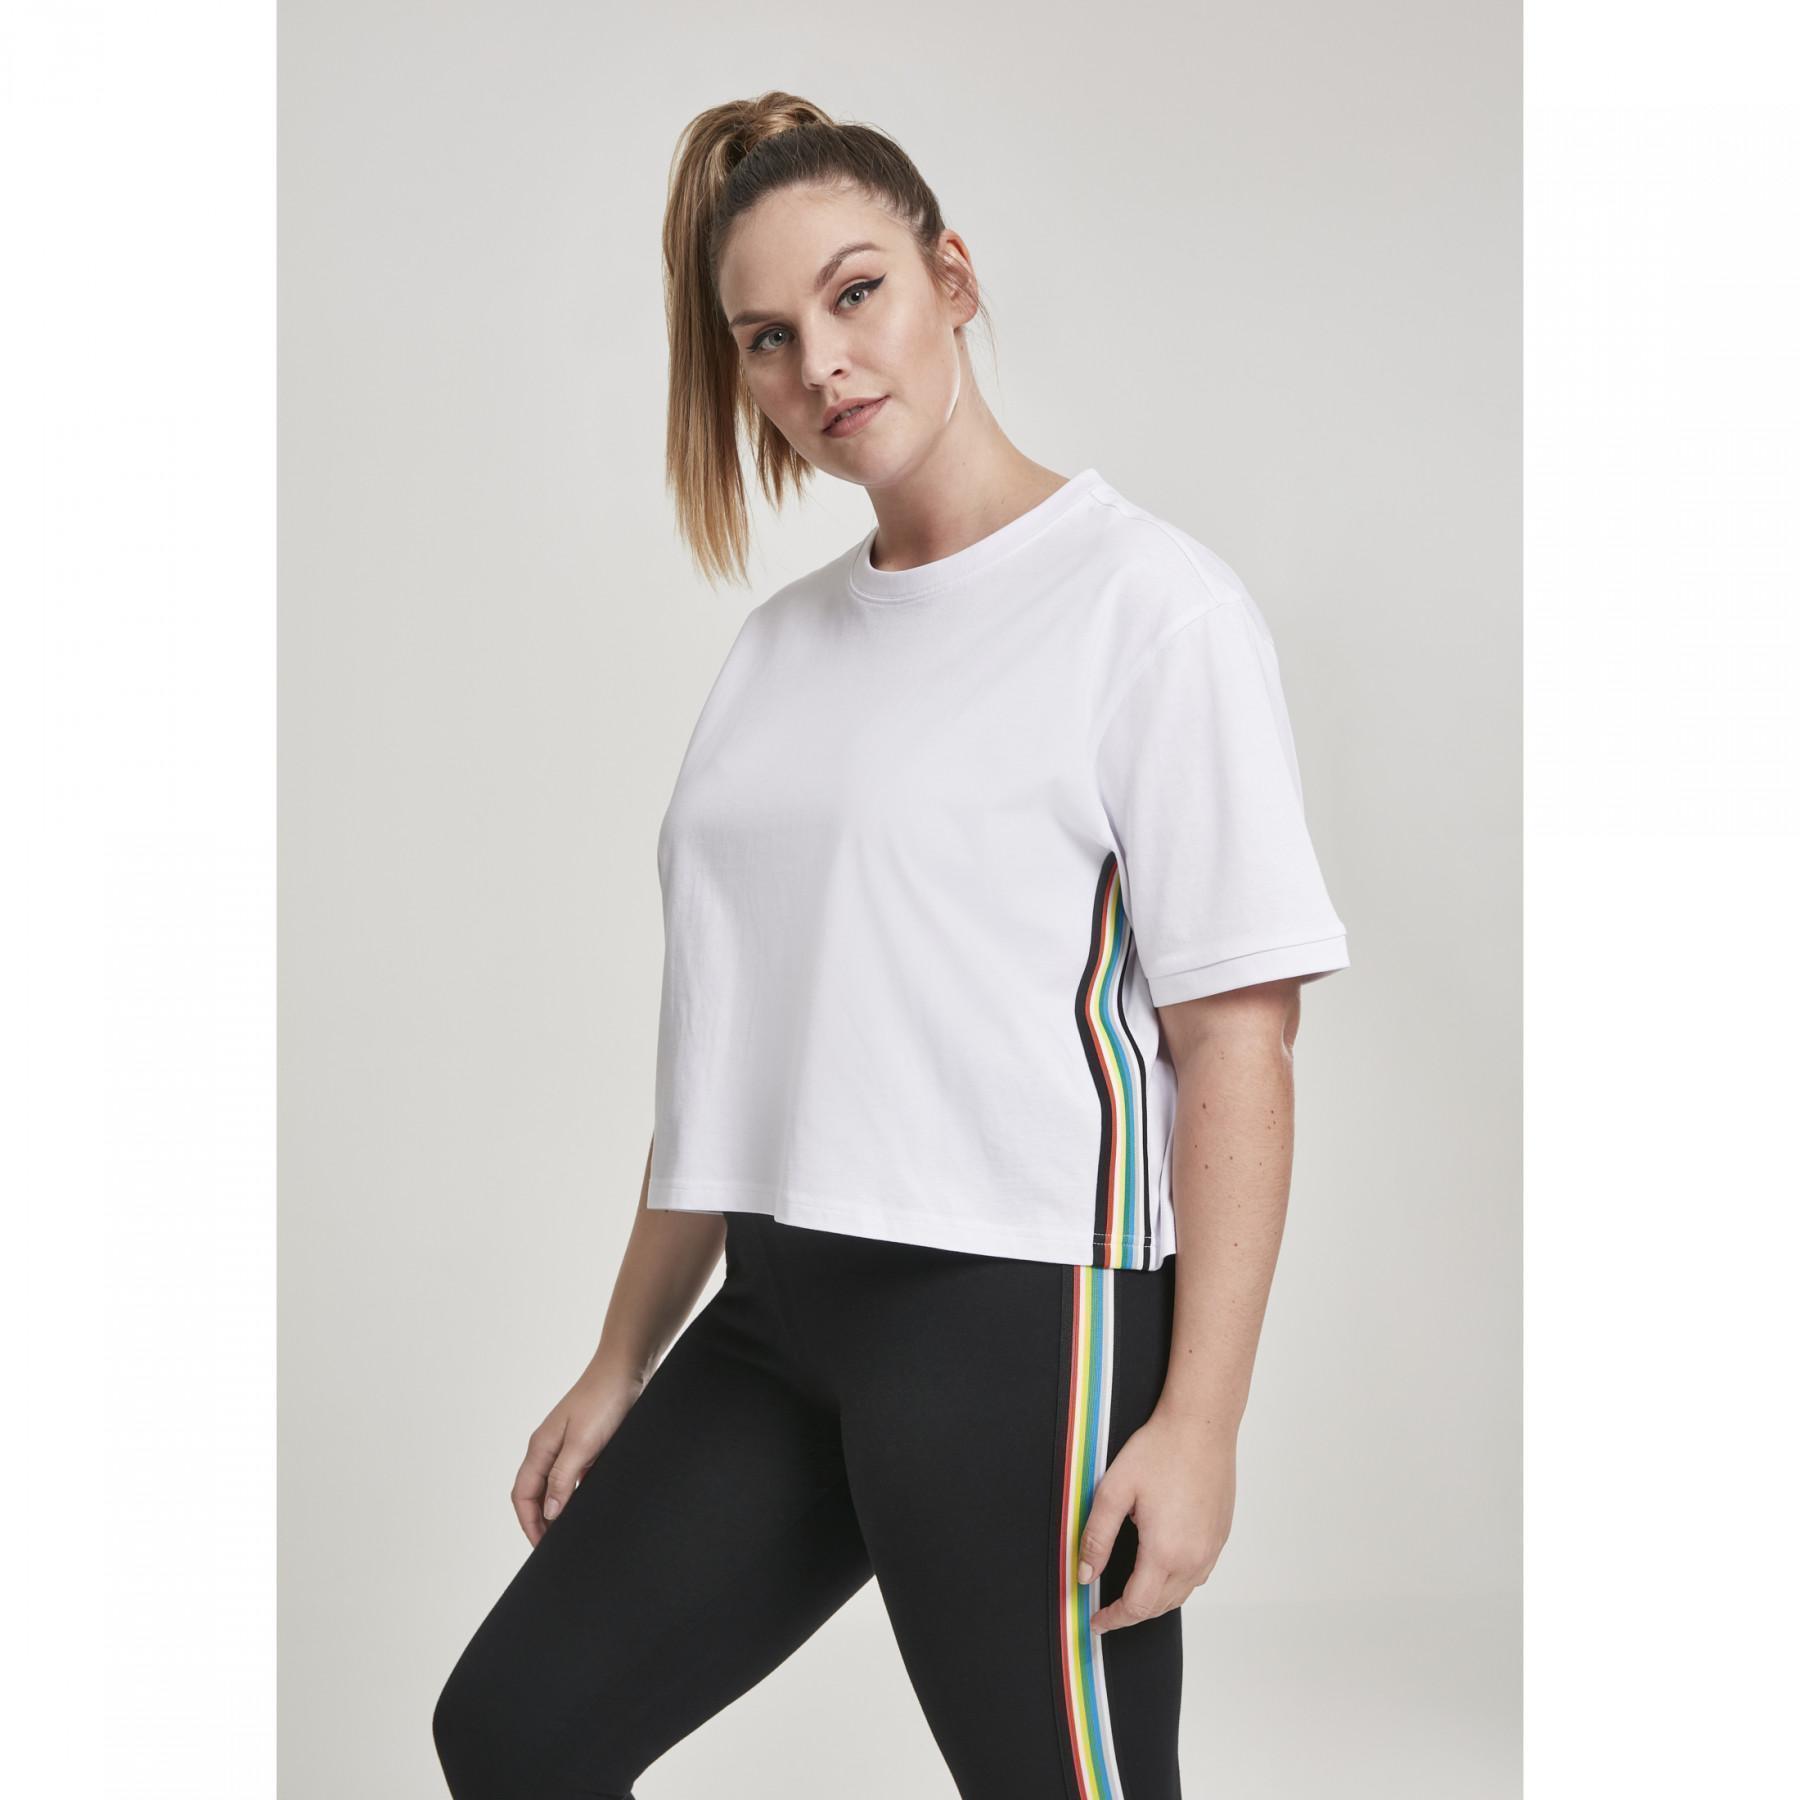 T-shirt femme grandes tailles Urban Classic taped